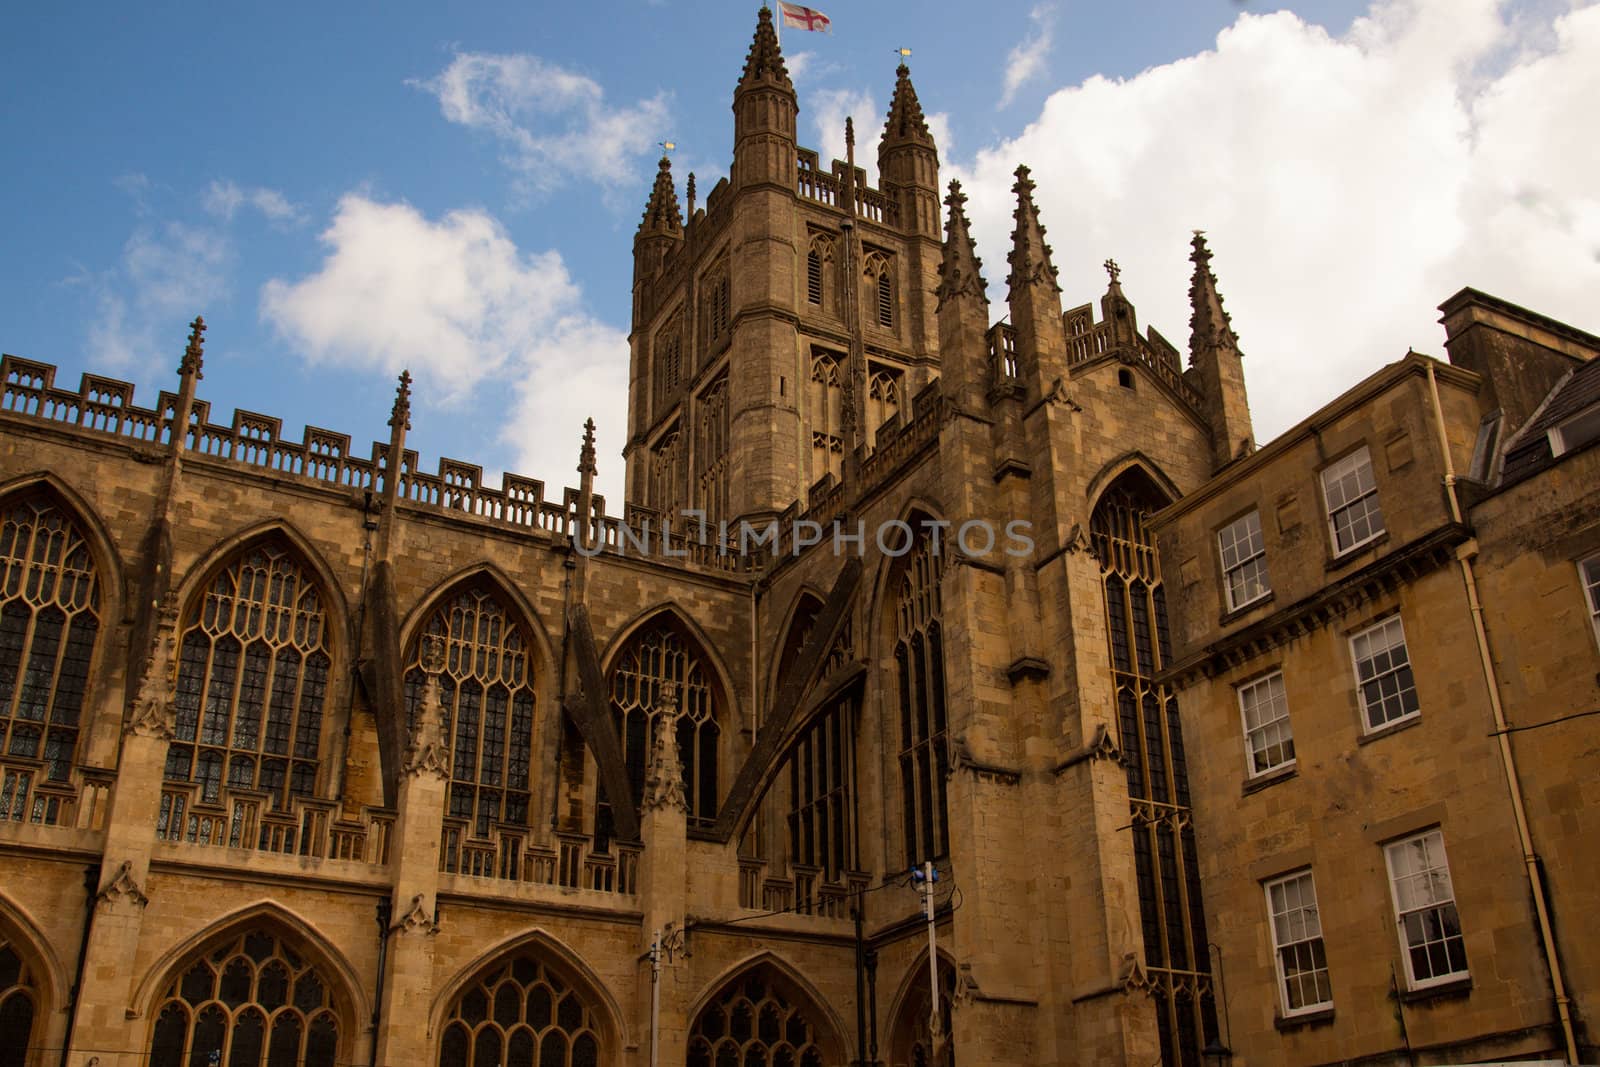 The Abbey Church of St. Peter and St. Paul, commonly known as Bath Abbey is a parish church in Bath, England. Founded in the 7th Century and rebuilt in the 12th Century it is an outstanding example of Gothic Architecture
